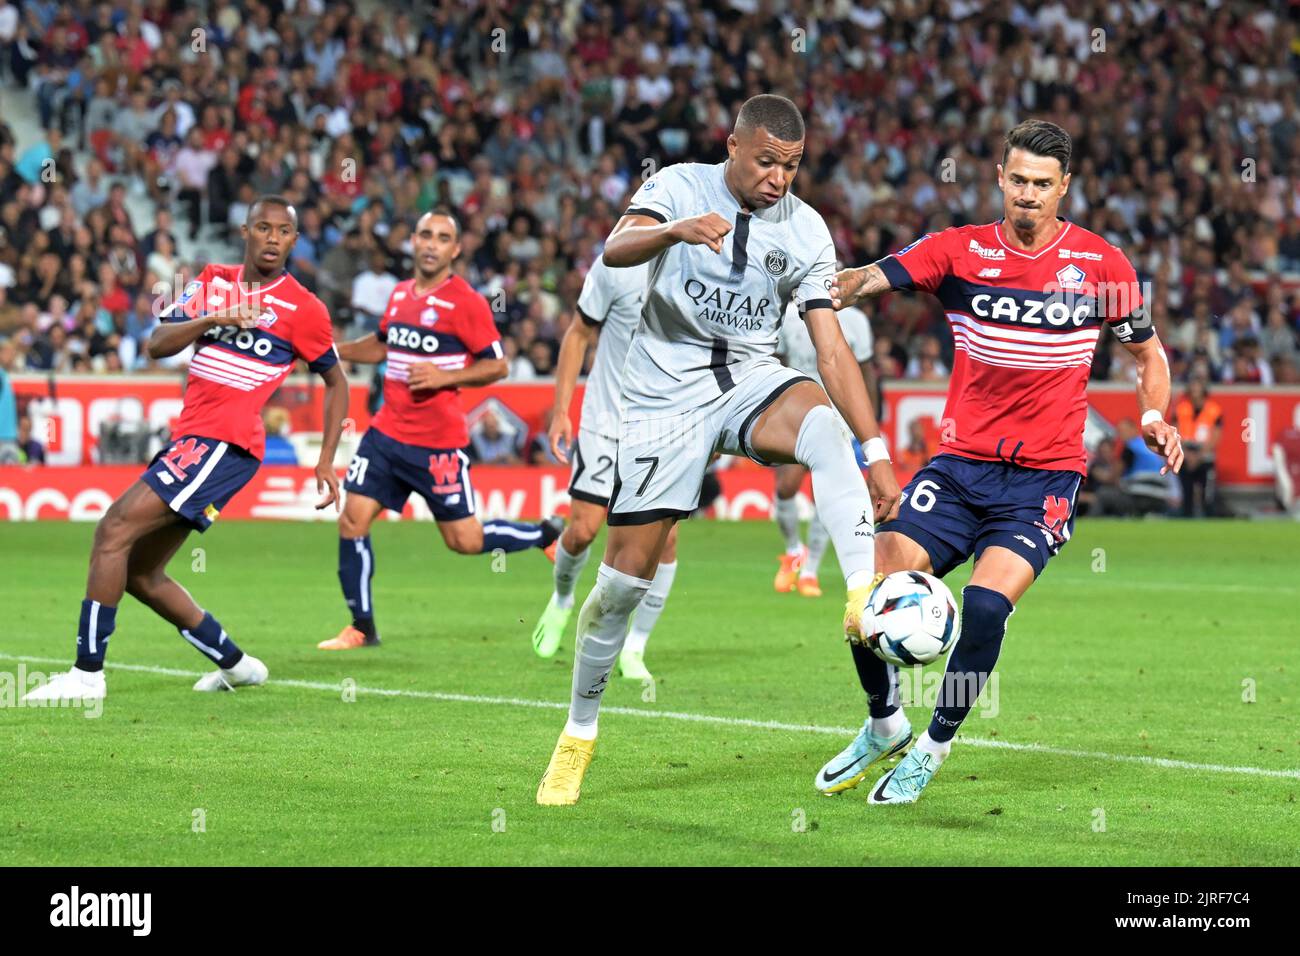 LILLE - (lr) Kylian Mbappe of Paris Saint-Germain, Jose Miguel da Rocha Fonte of LOSC Lille during the French Ligue 1 match between Lille OSC and Paris Saint Germain at Pierre-Mauroy Stadium on August 21, 2022 in Lille, France. ANP | Dutch Height | Gerrit van Keulen Stock Photo